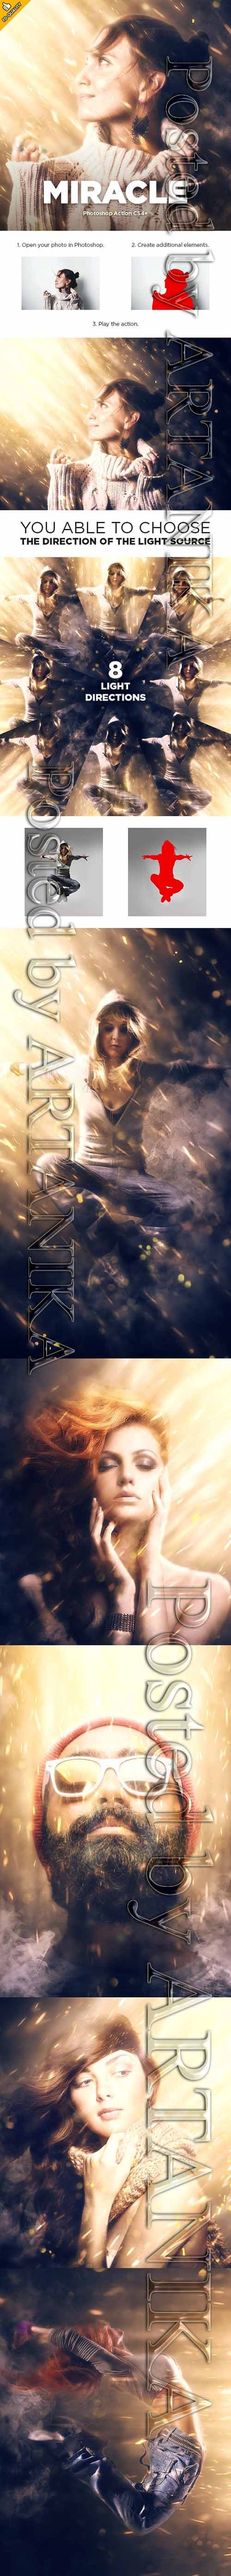 GraphicRiver - Miracle CS4+ Photoshop Action 23445492